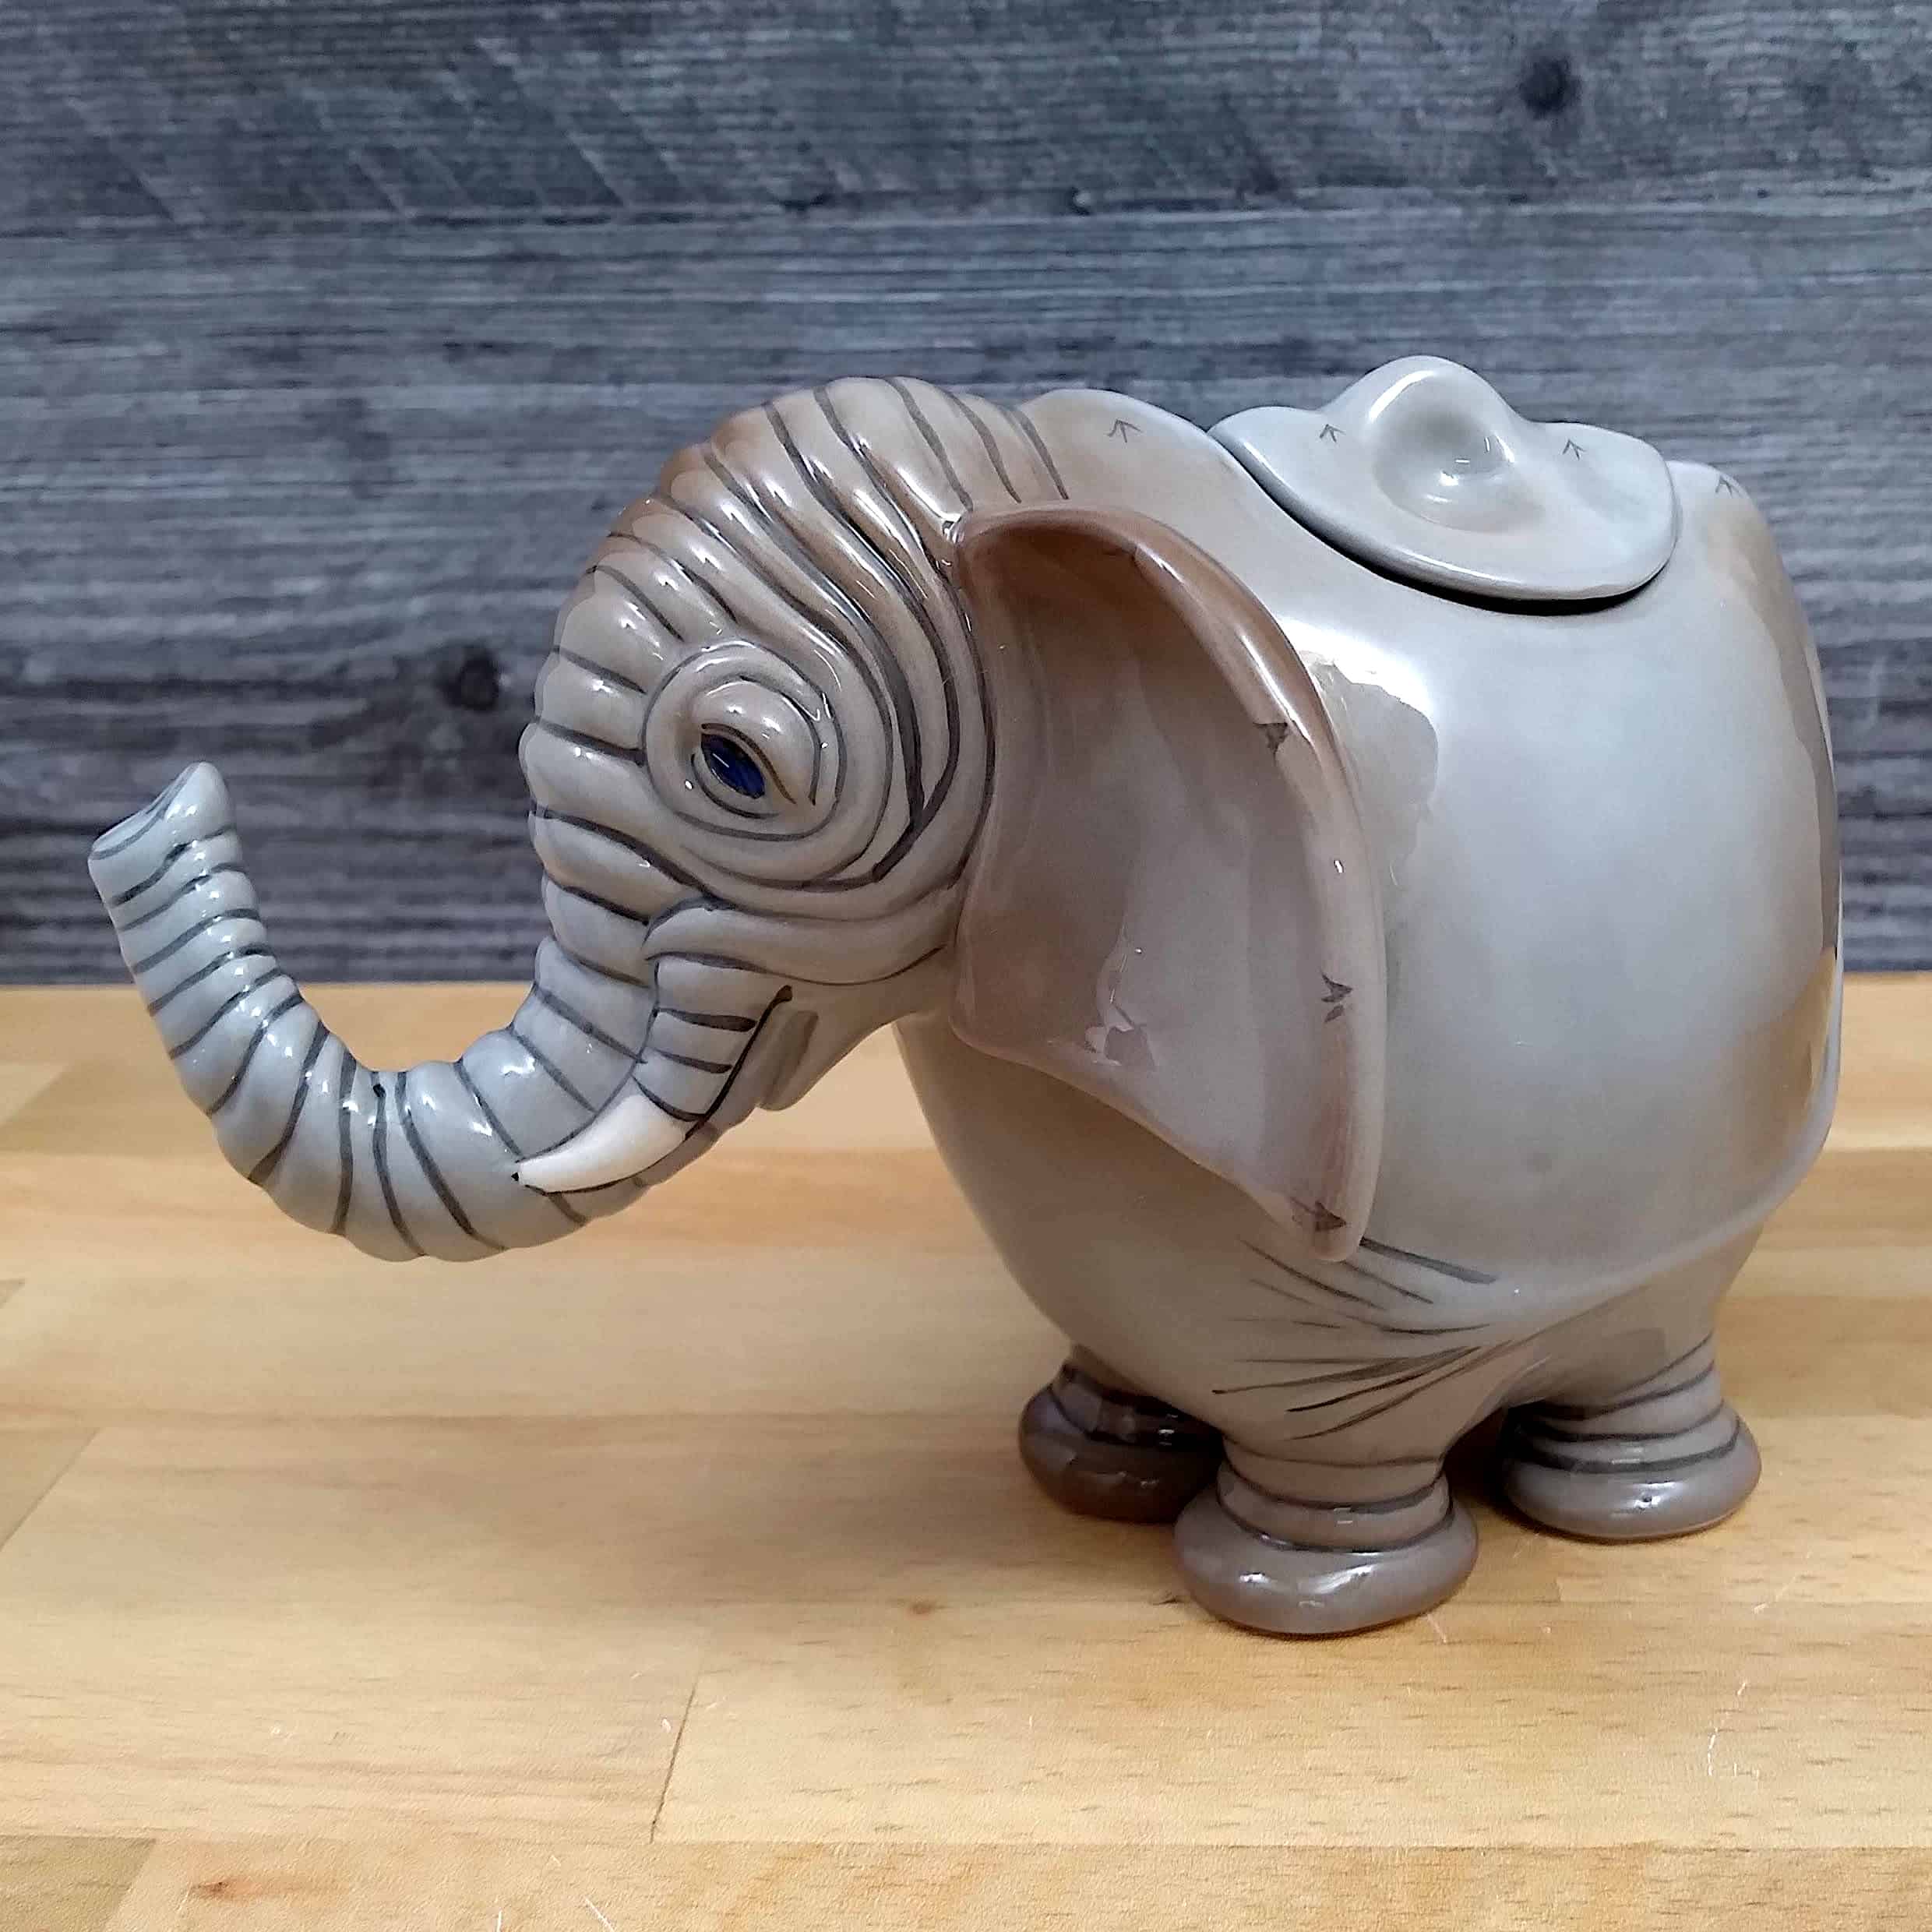 This Elephant Sugar Bowl and Creamer Set Decorative by Blue Sky is made with love by Premier Homegoods! Shop more unique gift ideas today with Spots Initiatives, the best way to support creators.